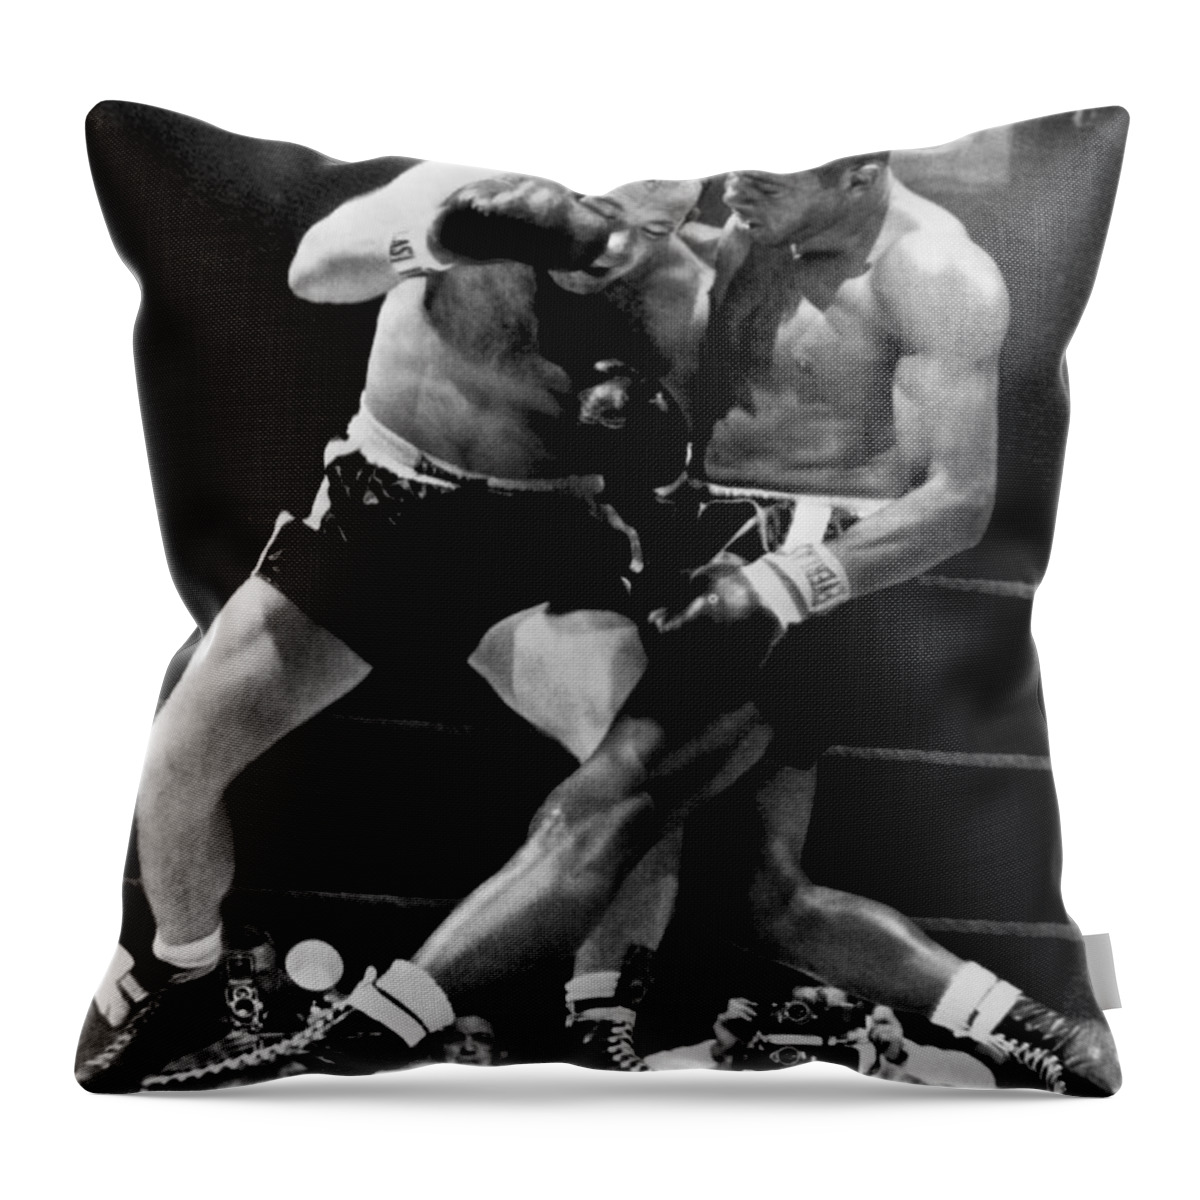 1950s Throw Pillow featuring the photograph Patterson And Johansson Boxing by Underwood Archives